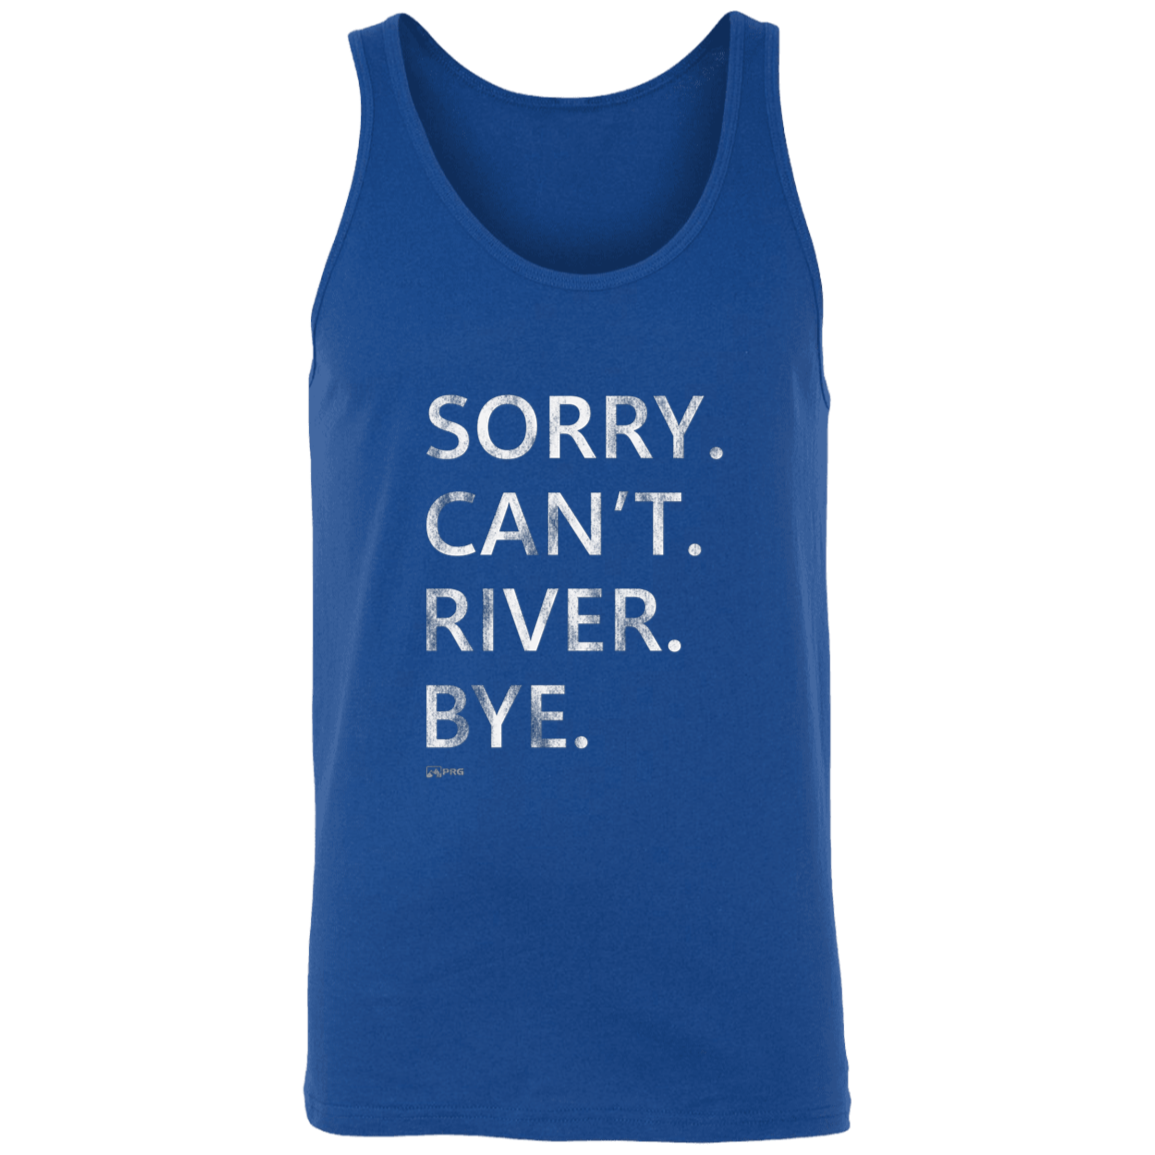 Sorry. Can't. River. Bye. - Tank